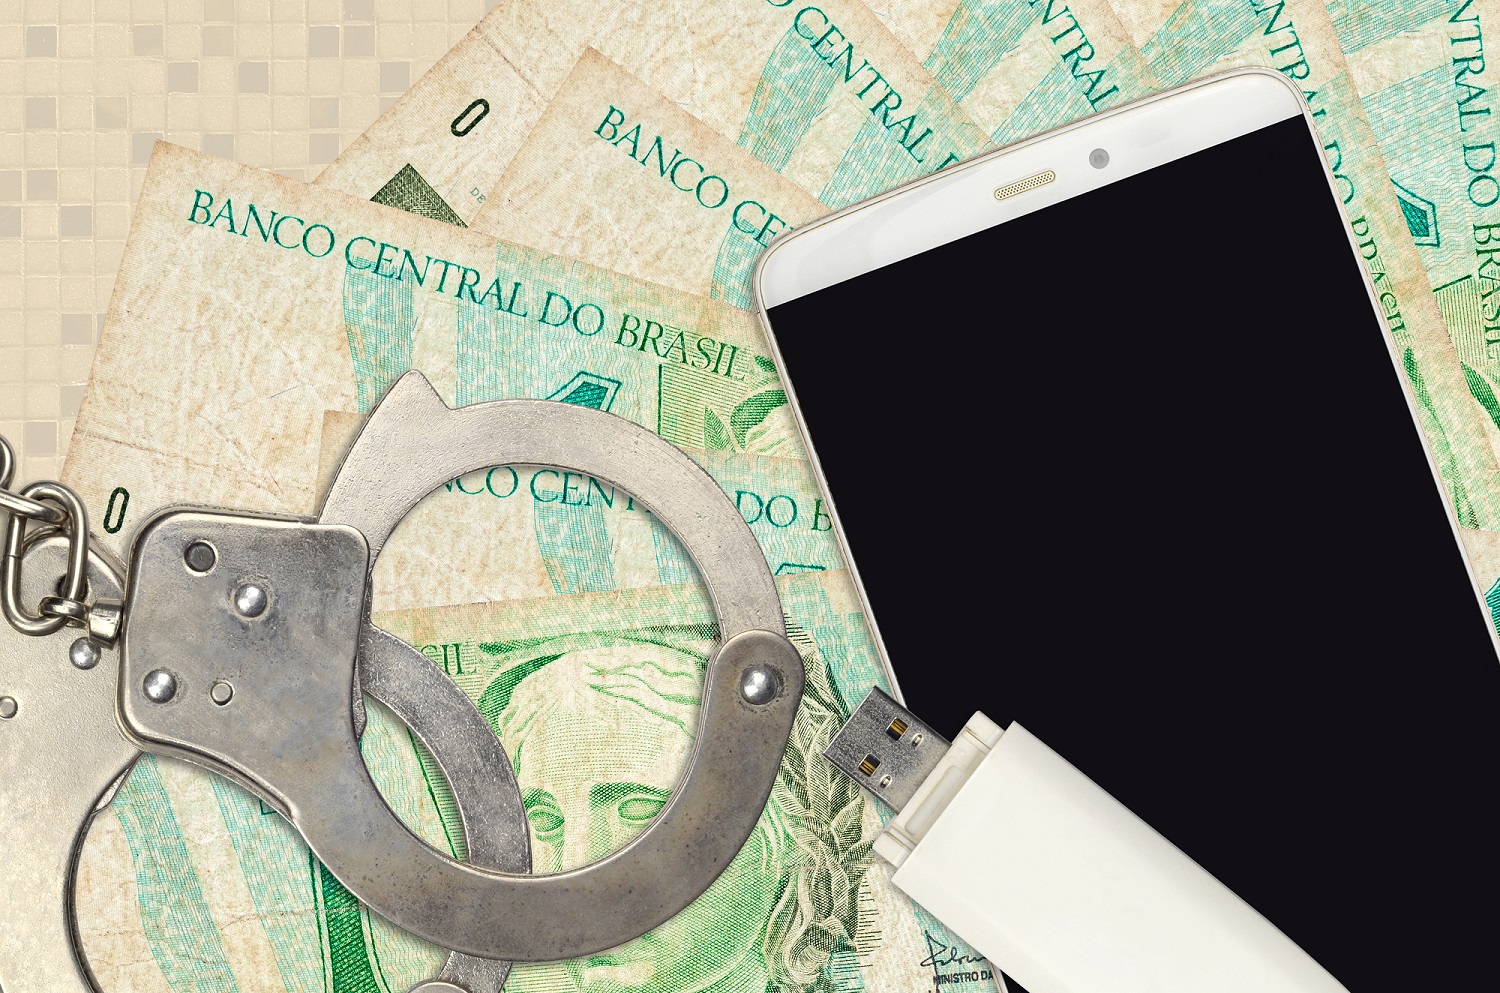 A USB storage device and a smartphone, along with a pair of police handcuffs, rest on a pile of Brazilian banknotes.